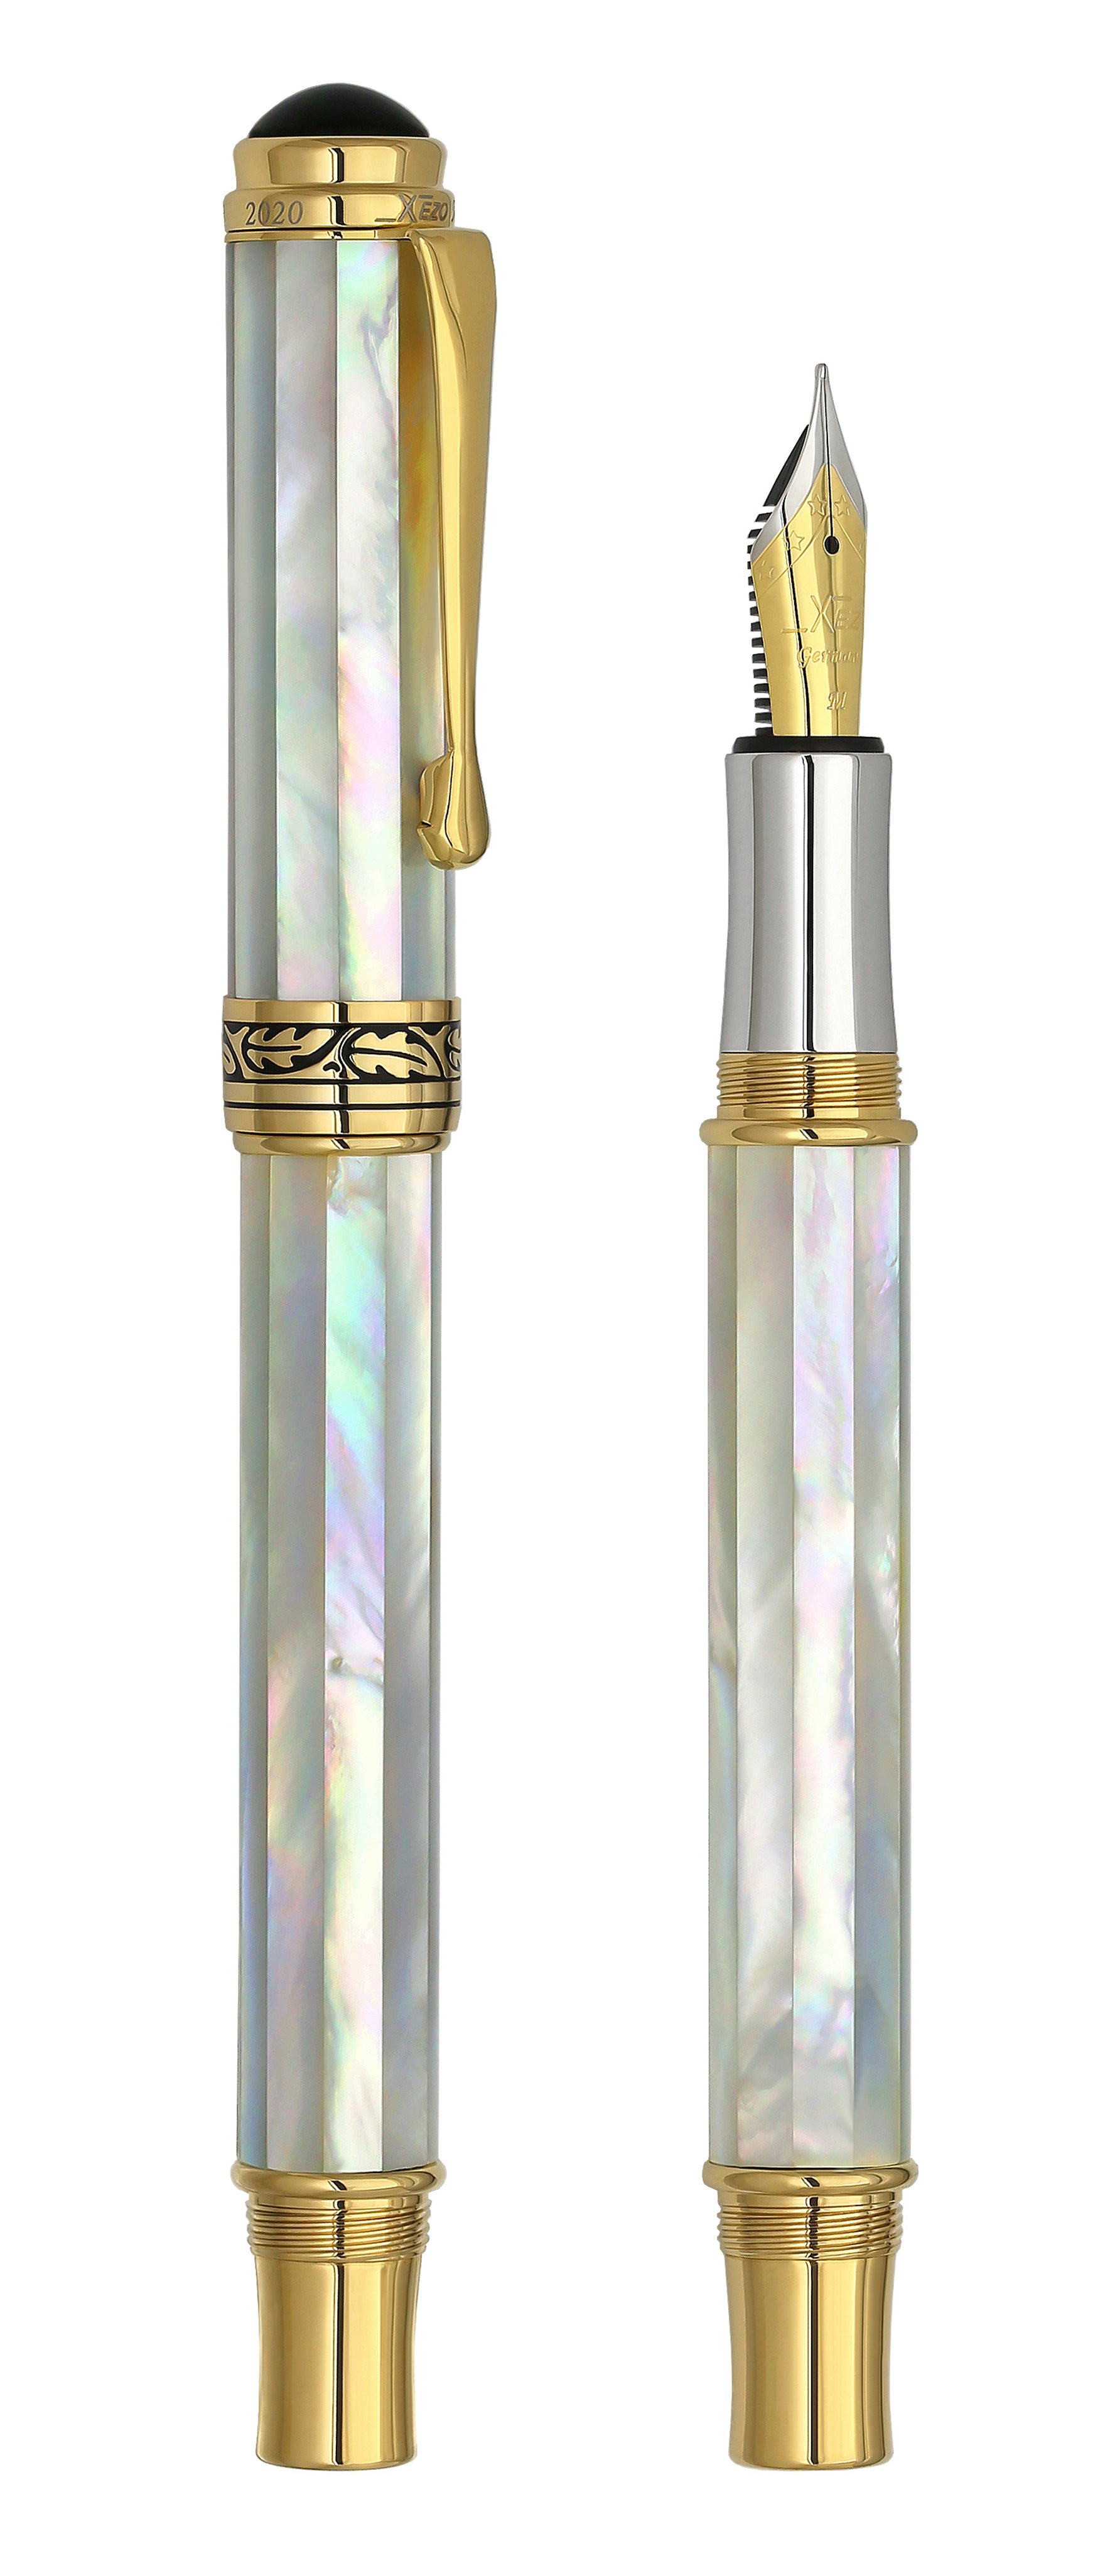 Xezo - Vertical view of two Maestro White MOP FM fountain pens; the one on the left is capped, and the one on the right is uncapped